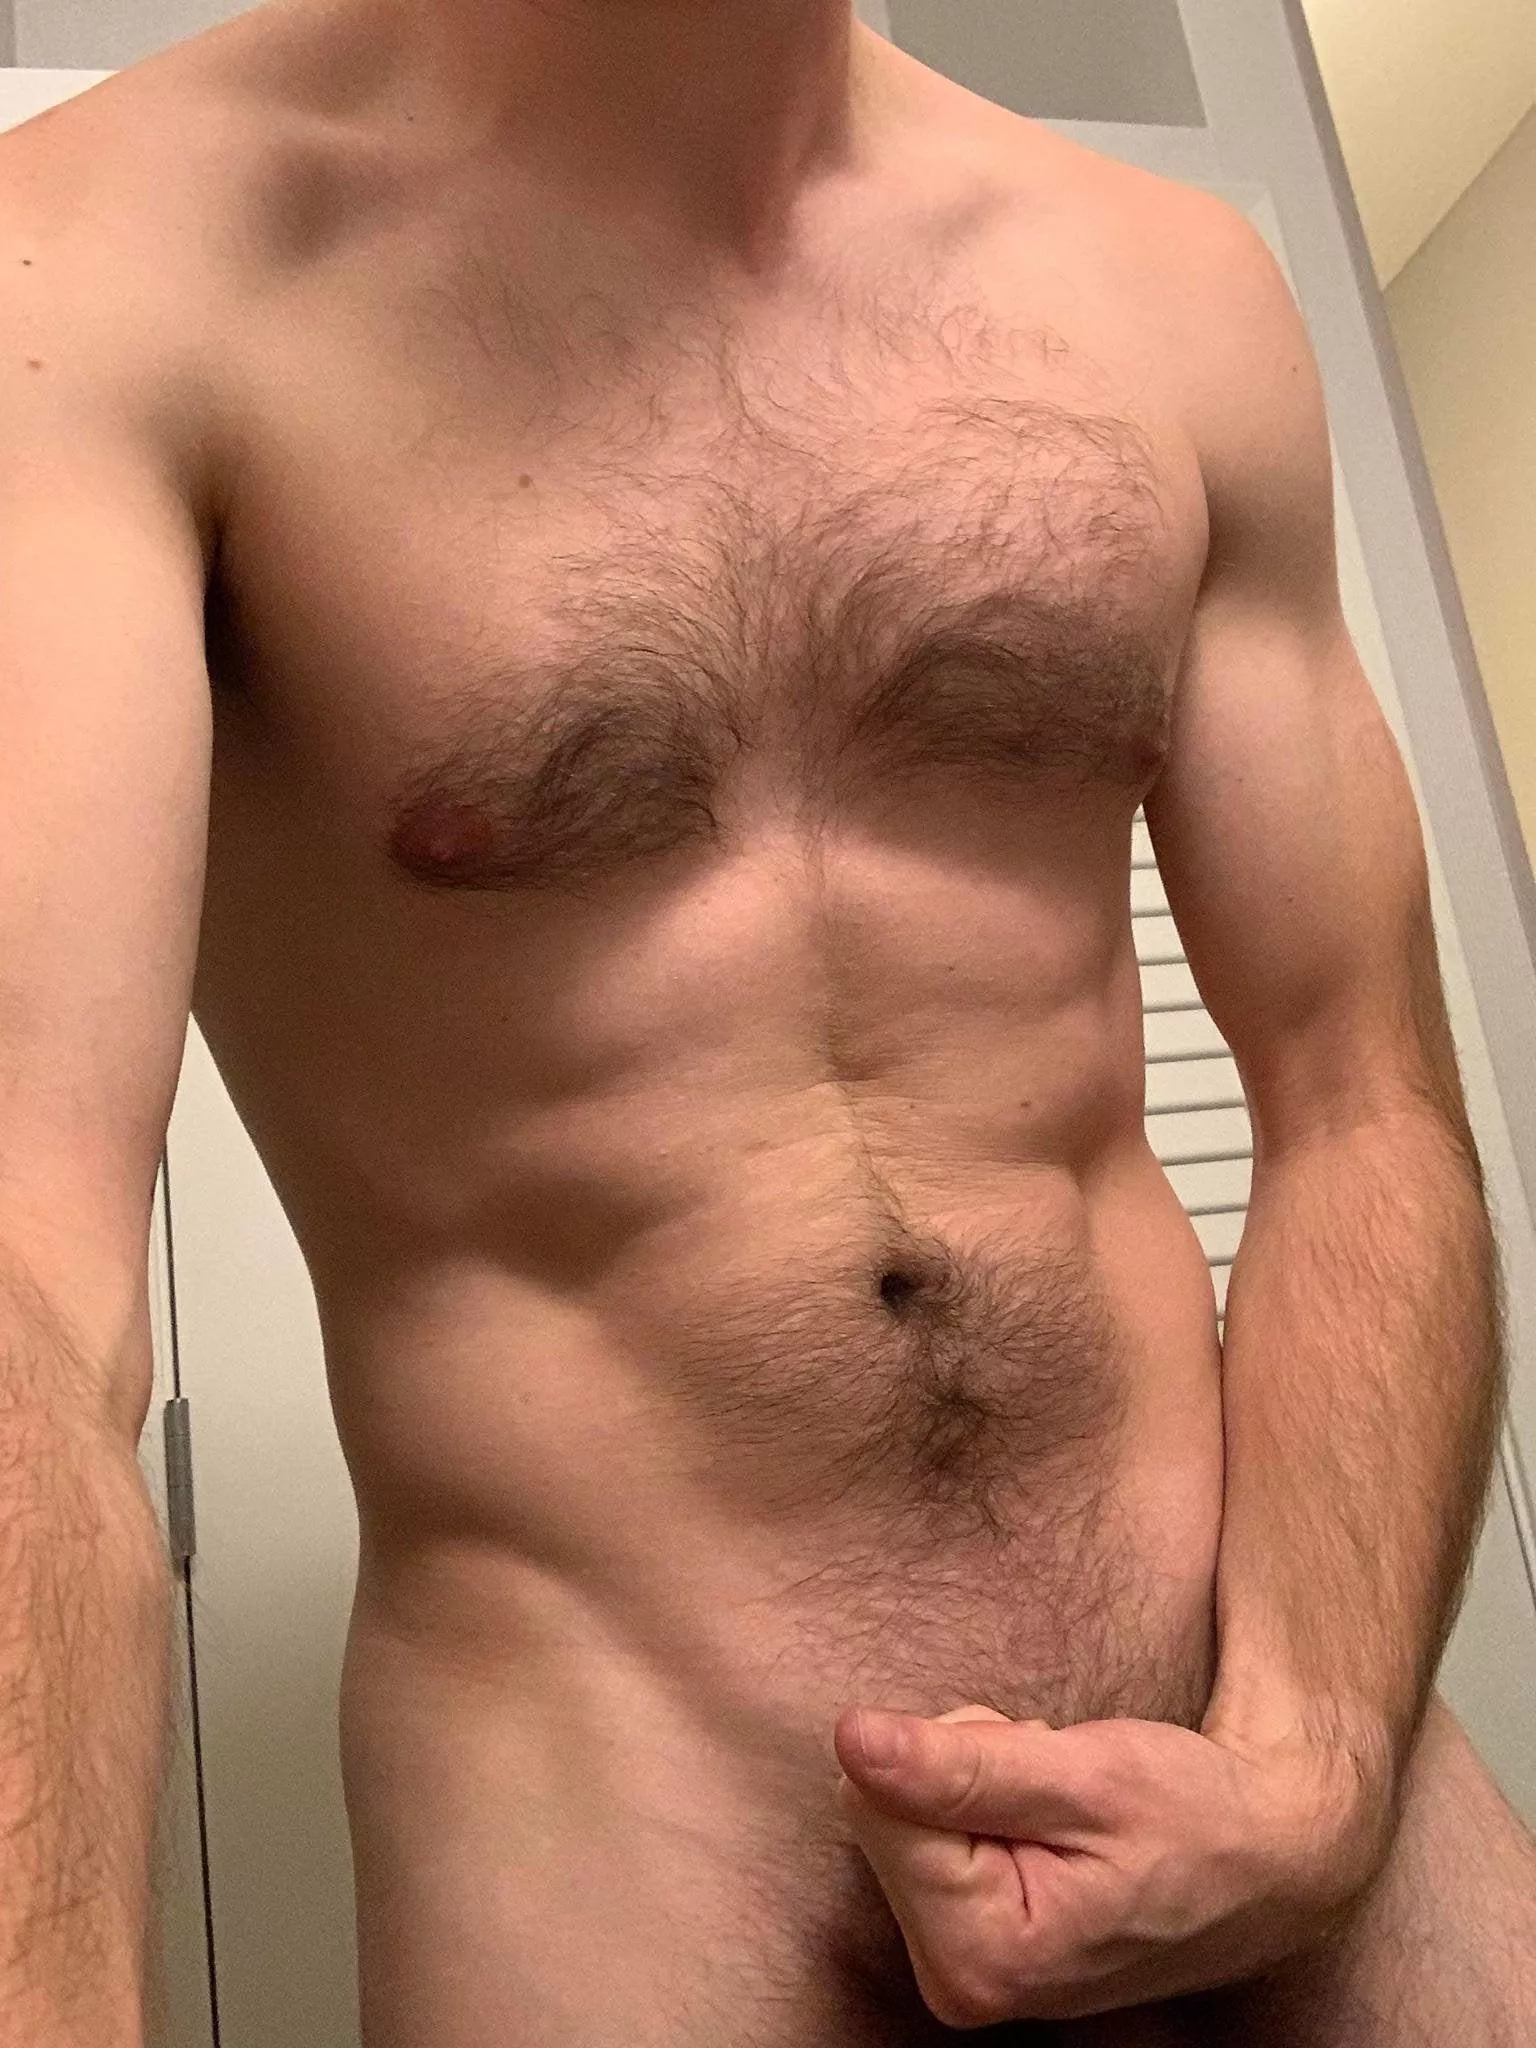 27m Muscular And Hung Bull Looking For A Cute Hotwife In Minneapolis